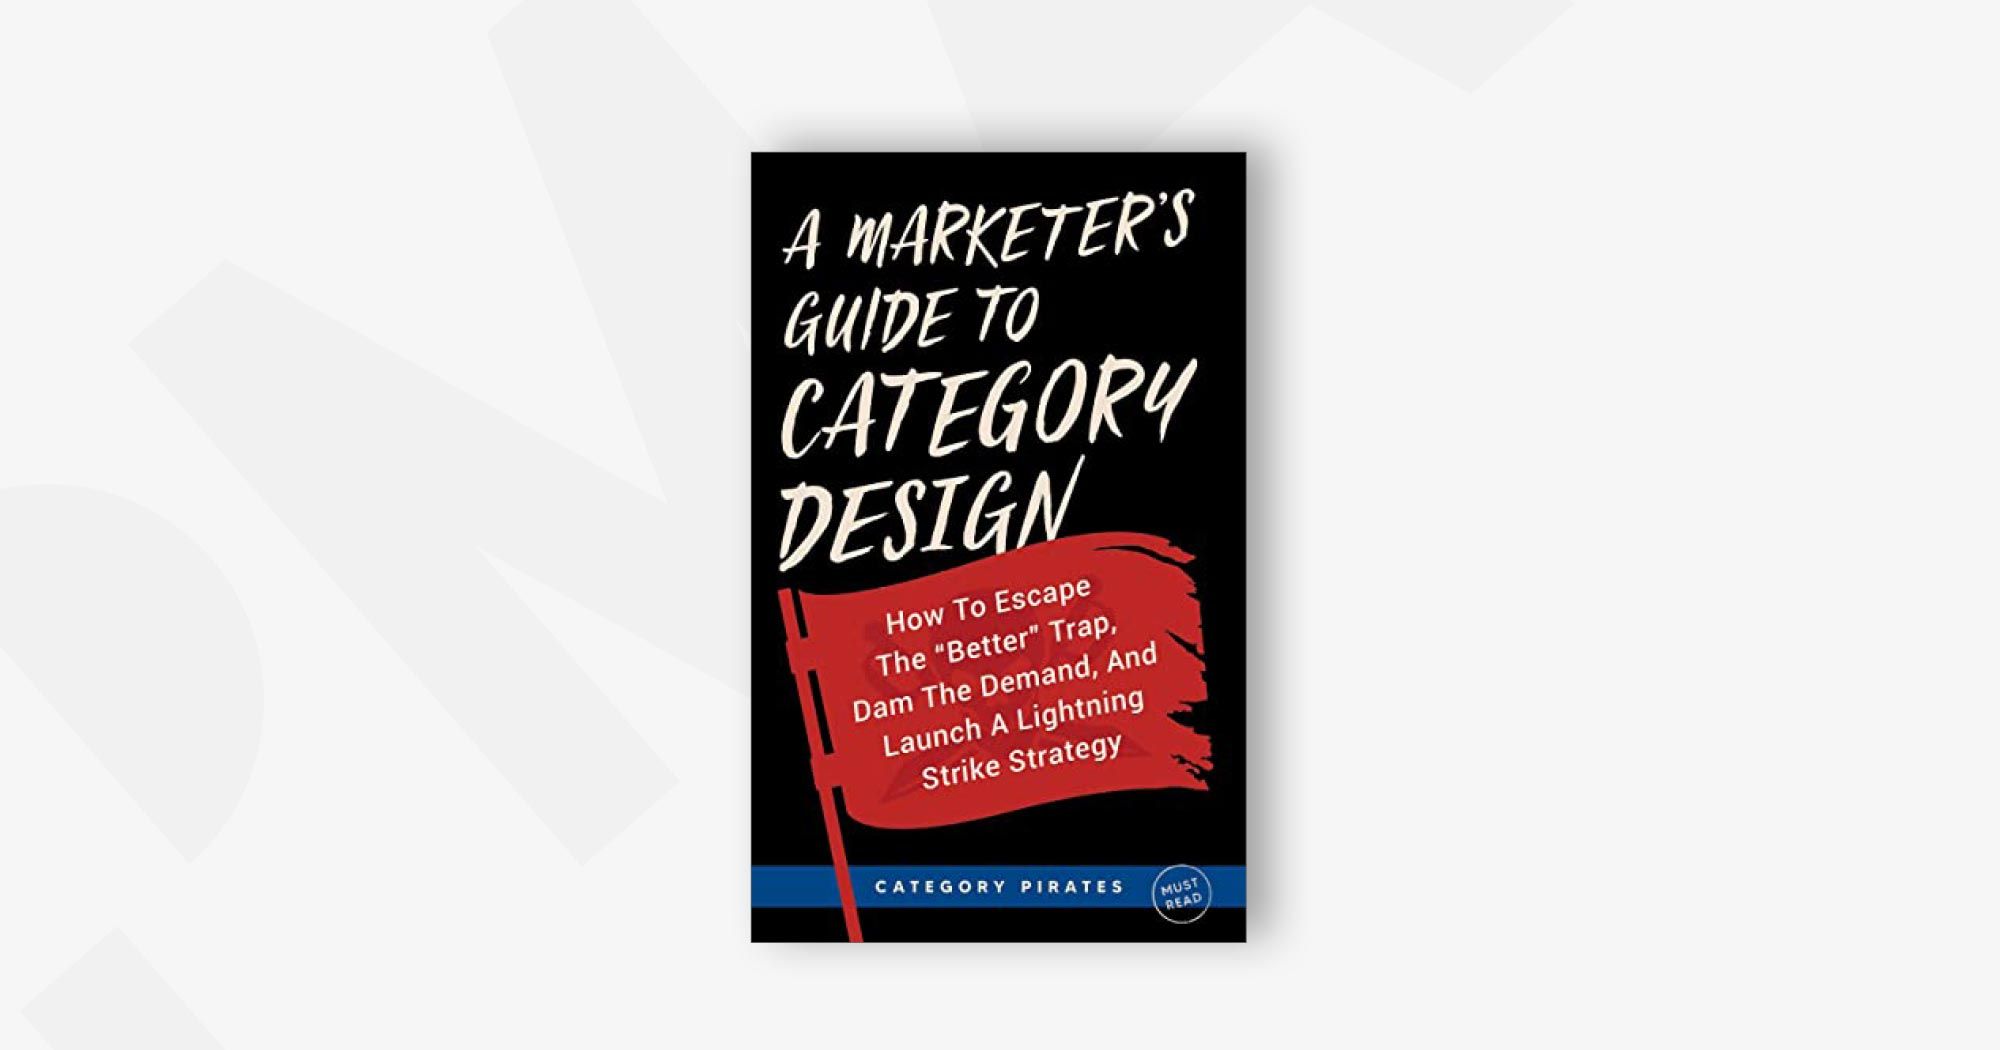 A Marketer's Guide To Category Design: How To Escape The "Better" Trap, Dam The Demand, And Launch A Lightning Strike Strategy – Category Pirates, Christopher Lochhead, Eddie Yoon, and Nicolas Cole 